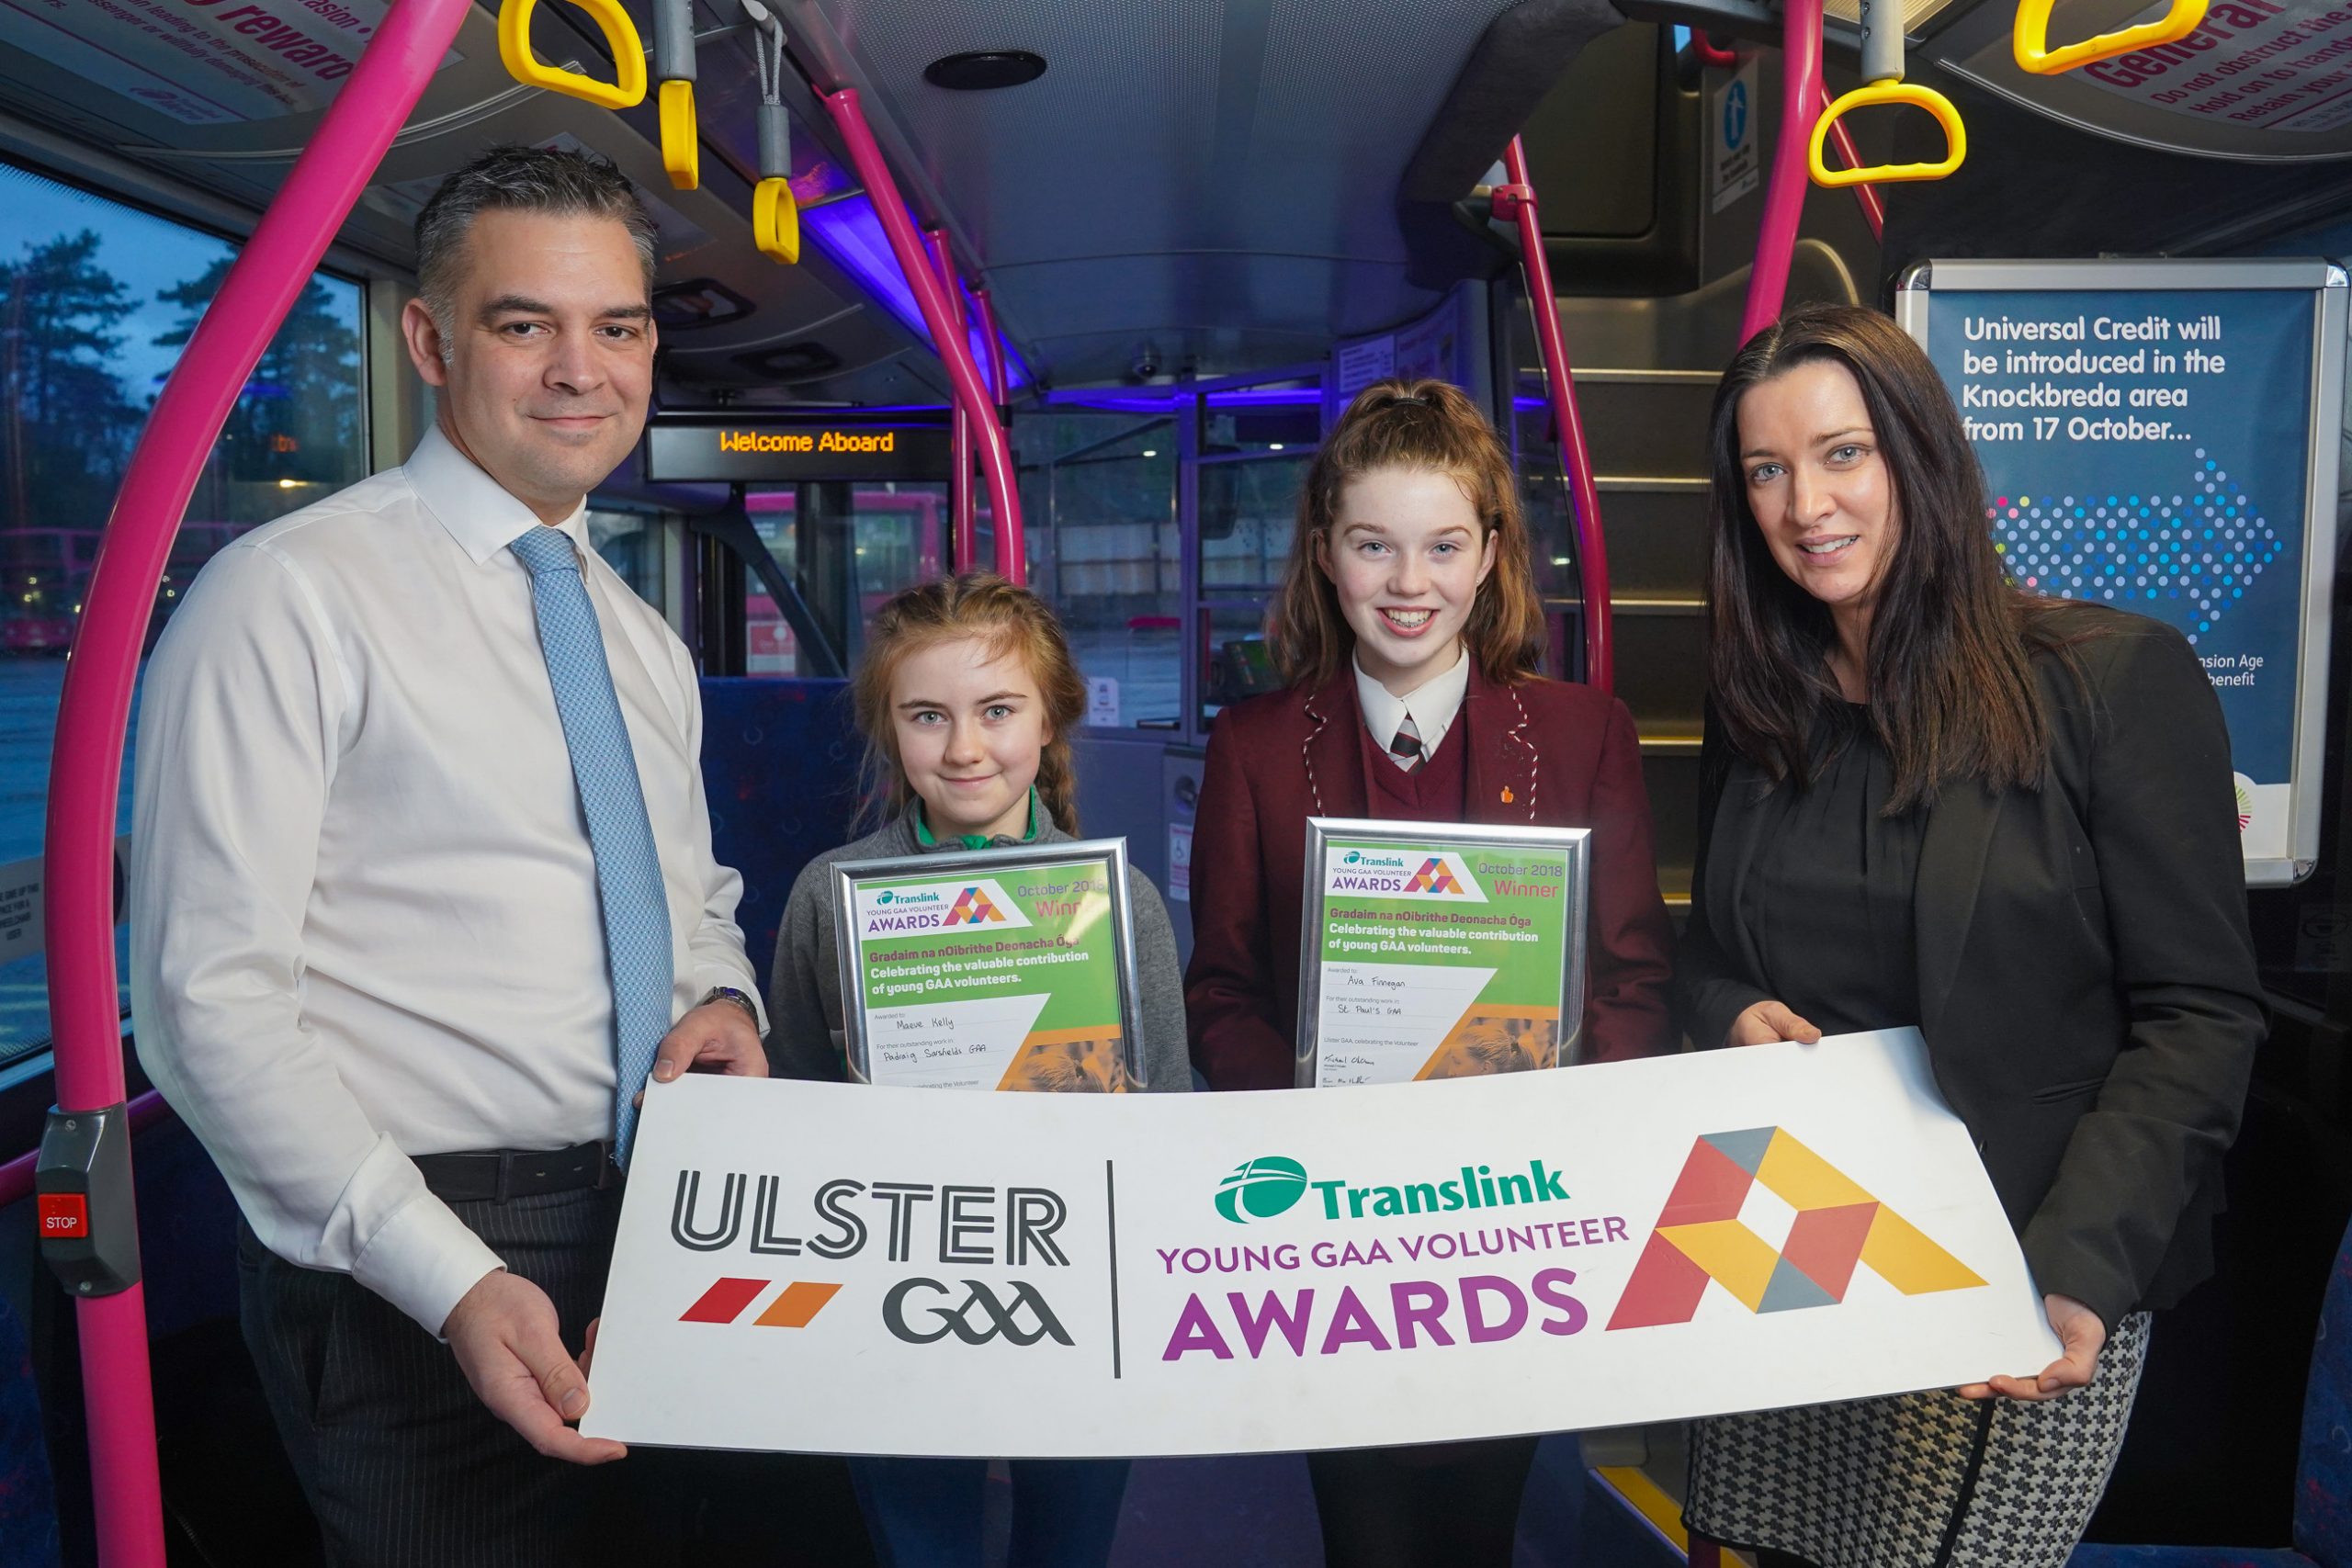 Joint winners of Translink Ulster GAA Young Volunteer of the Month award